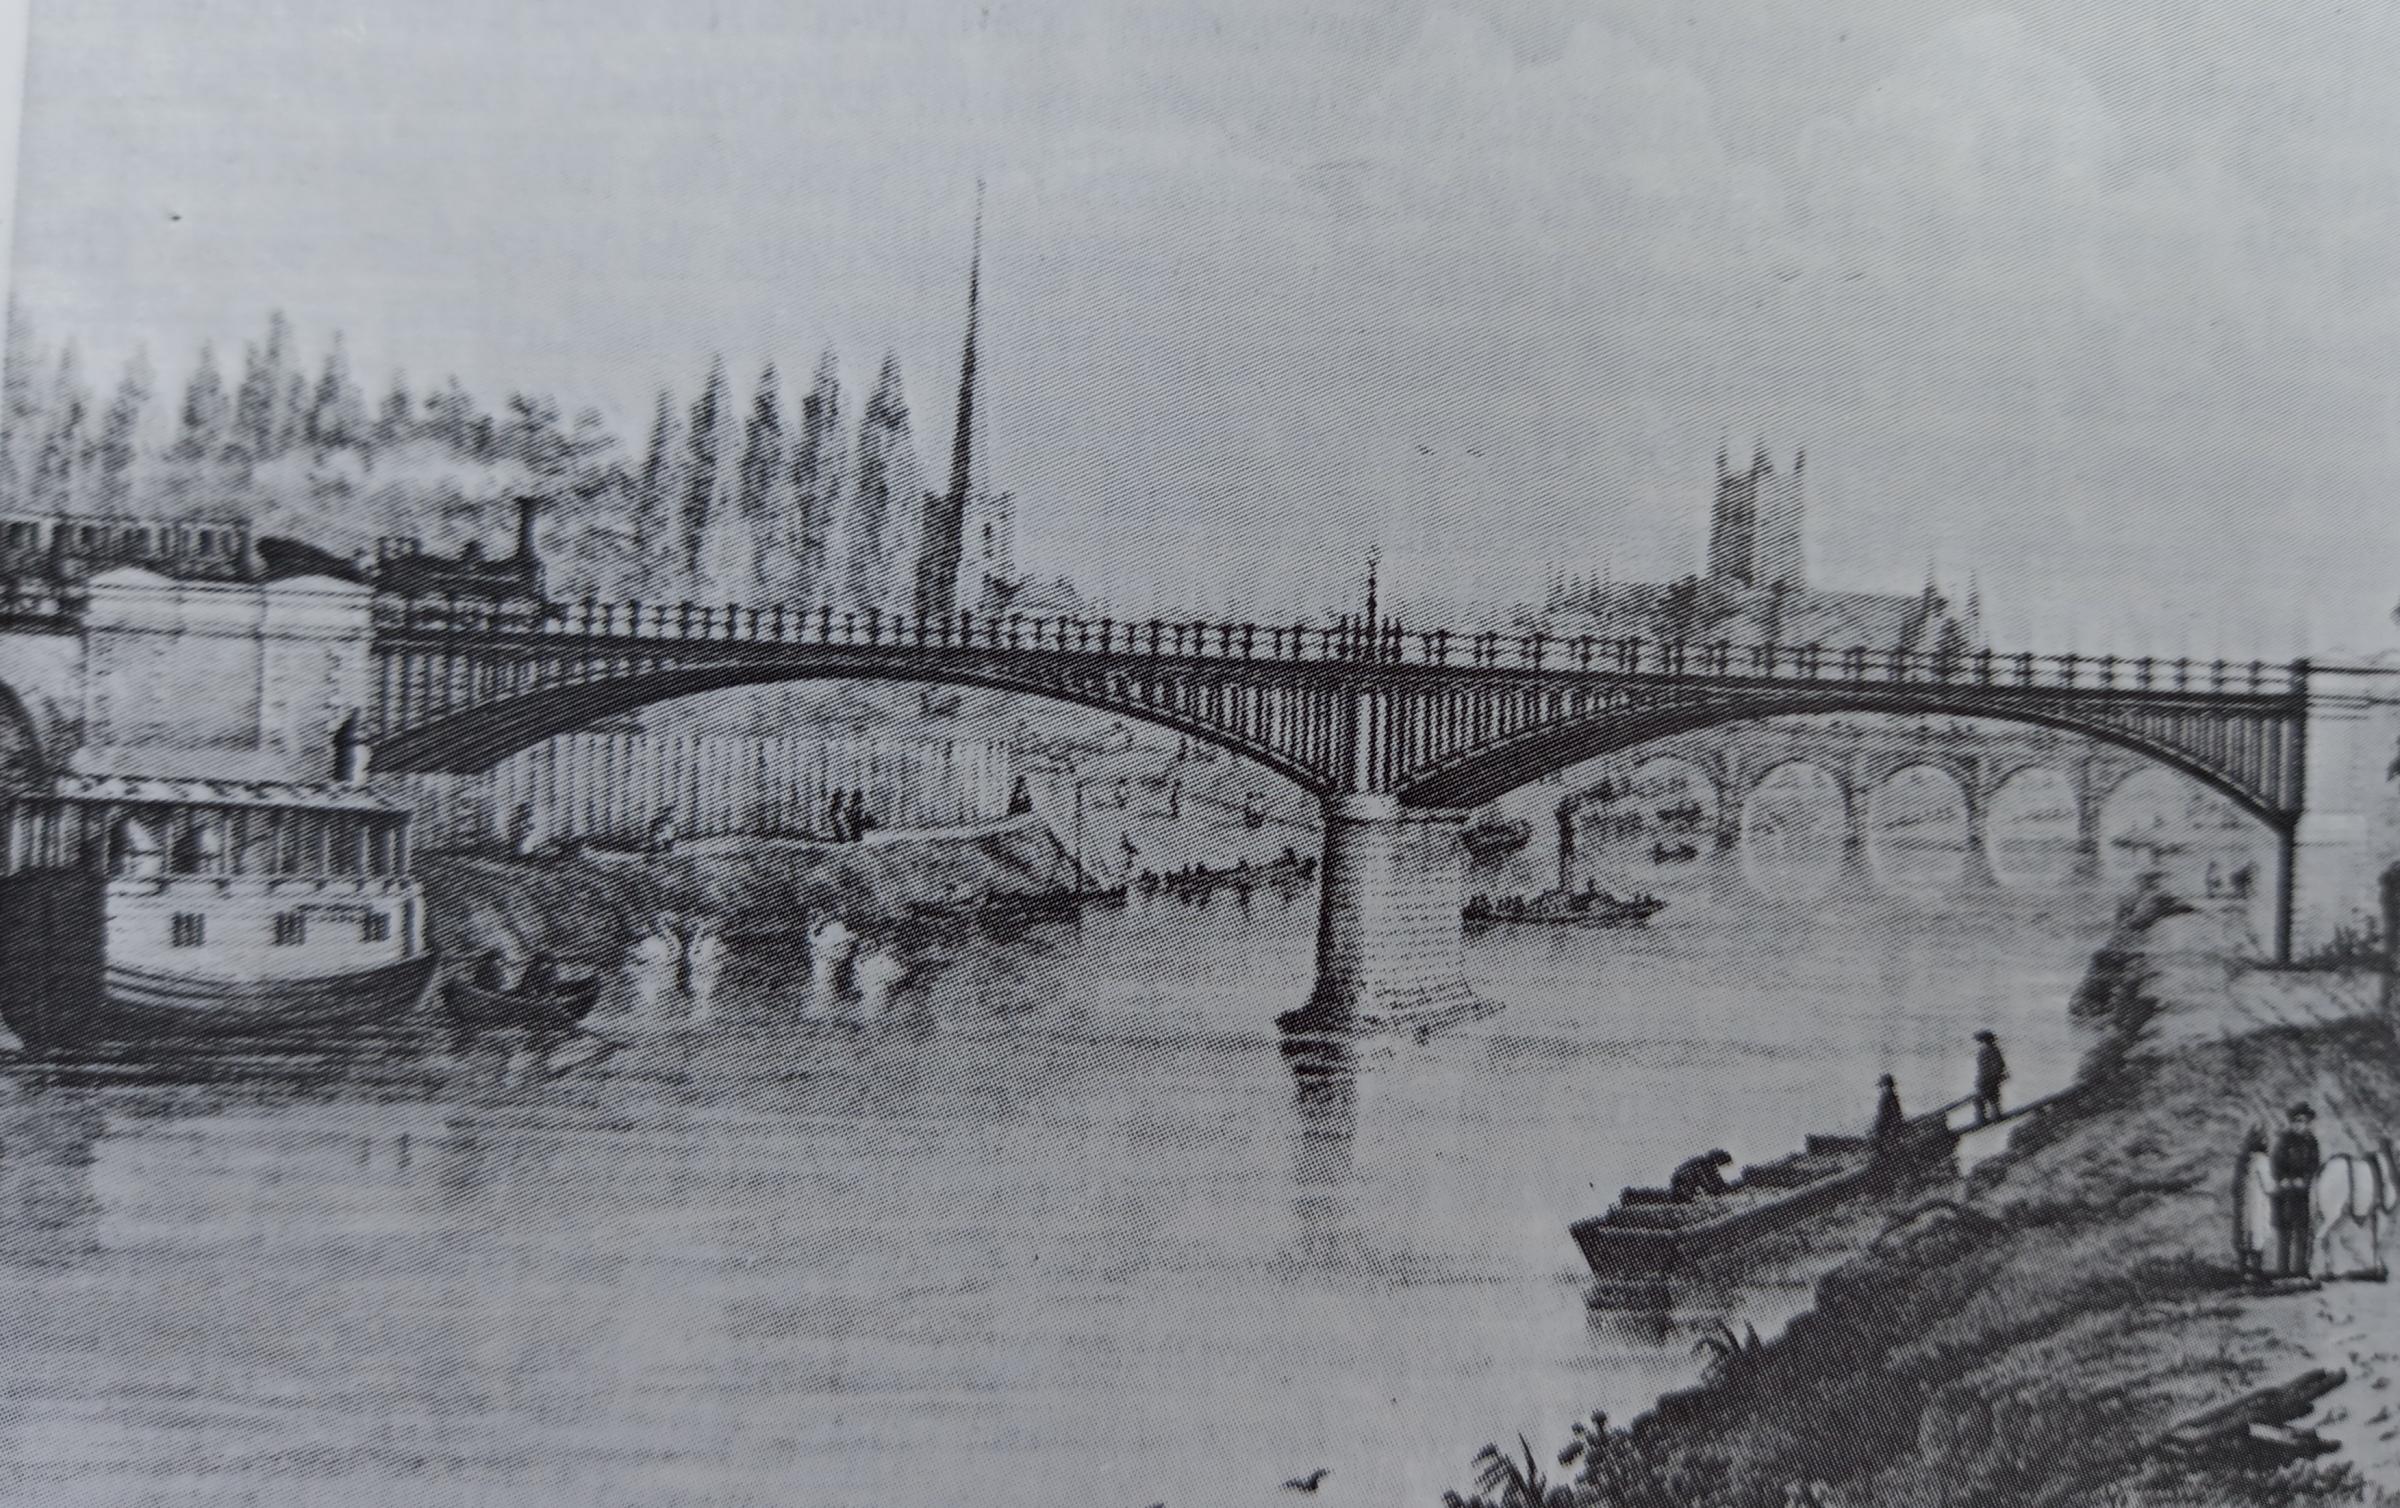 Worcester’s first rail bridge, built in the late 1850s by Stephen Ballard of Colwall.